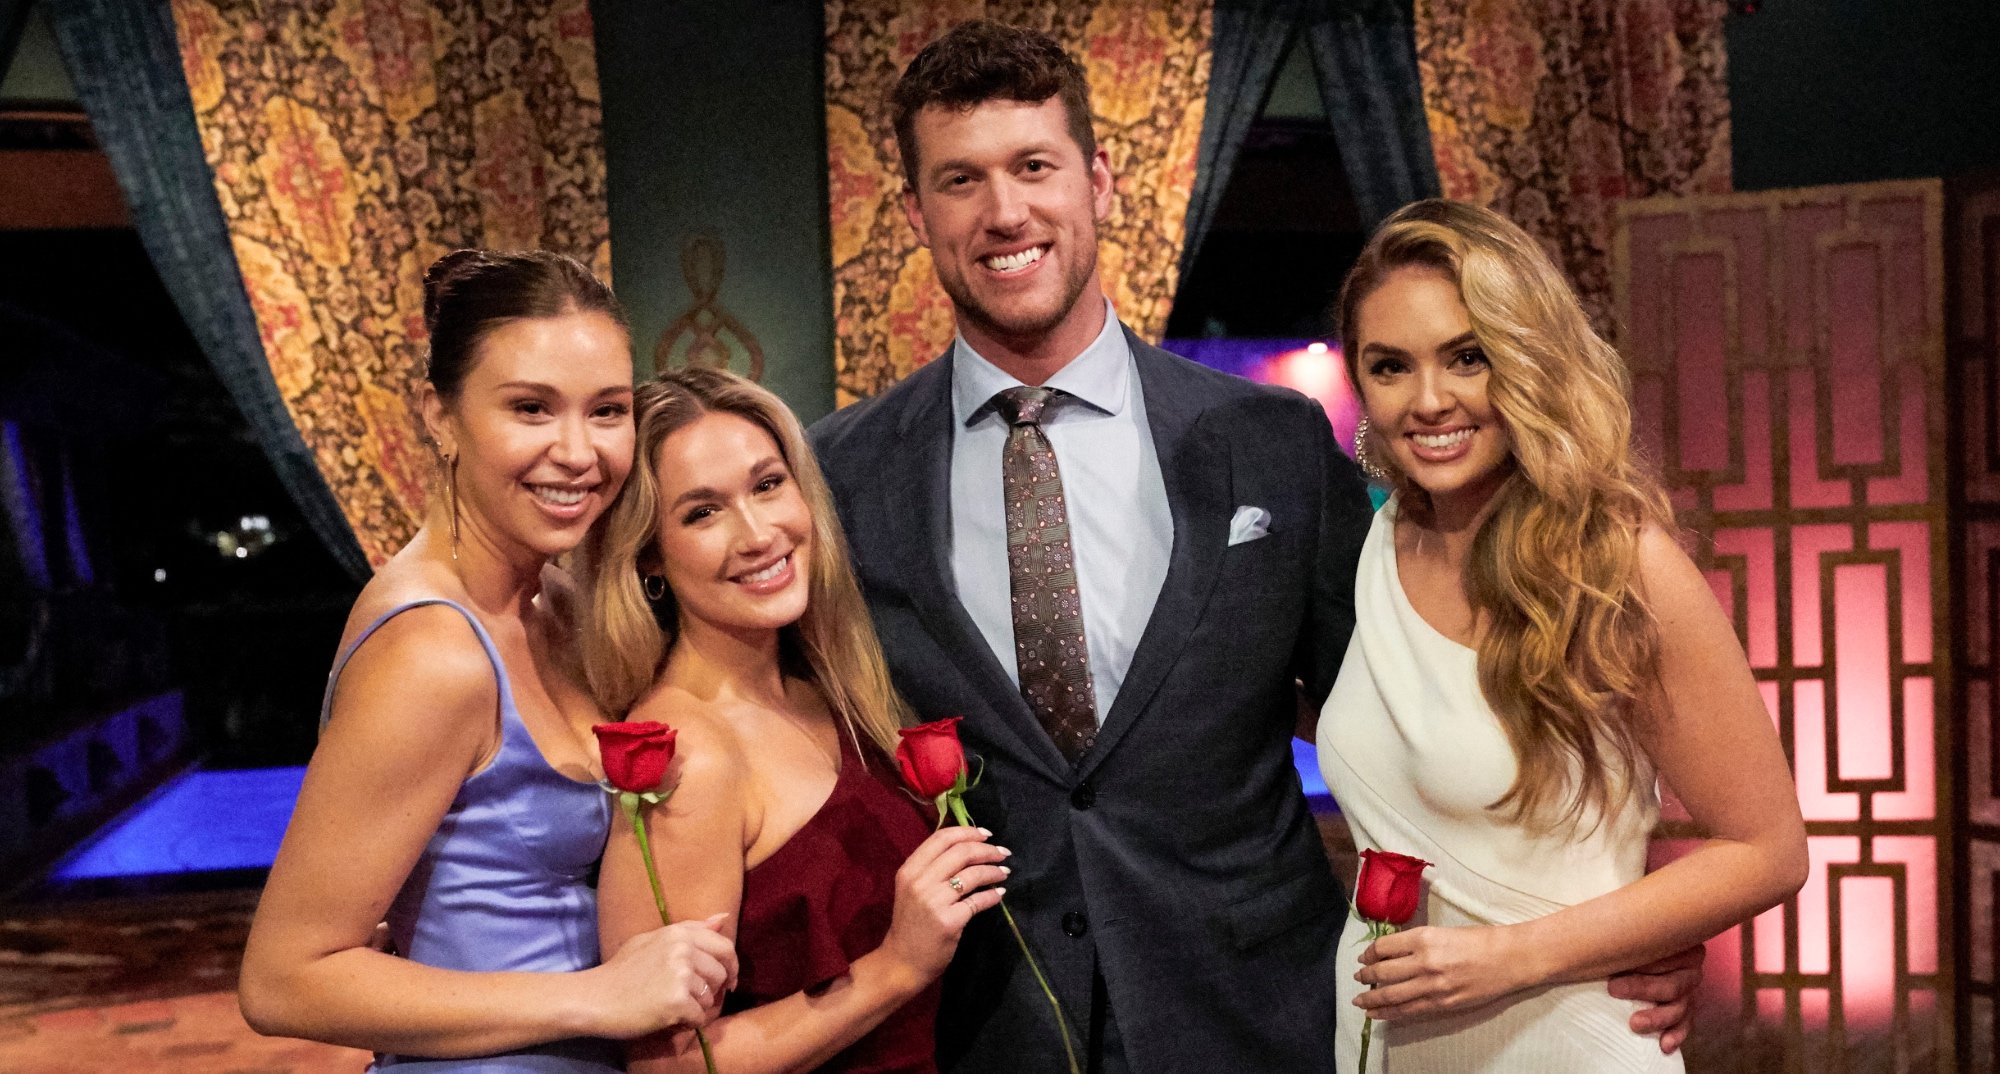 Clayton Echard with Gabby, Rachel and Susie for 'The Bachelor' in group photo after rose ceremony. 